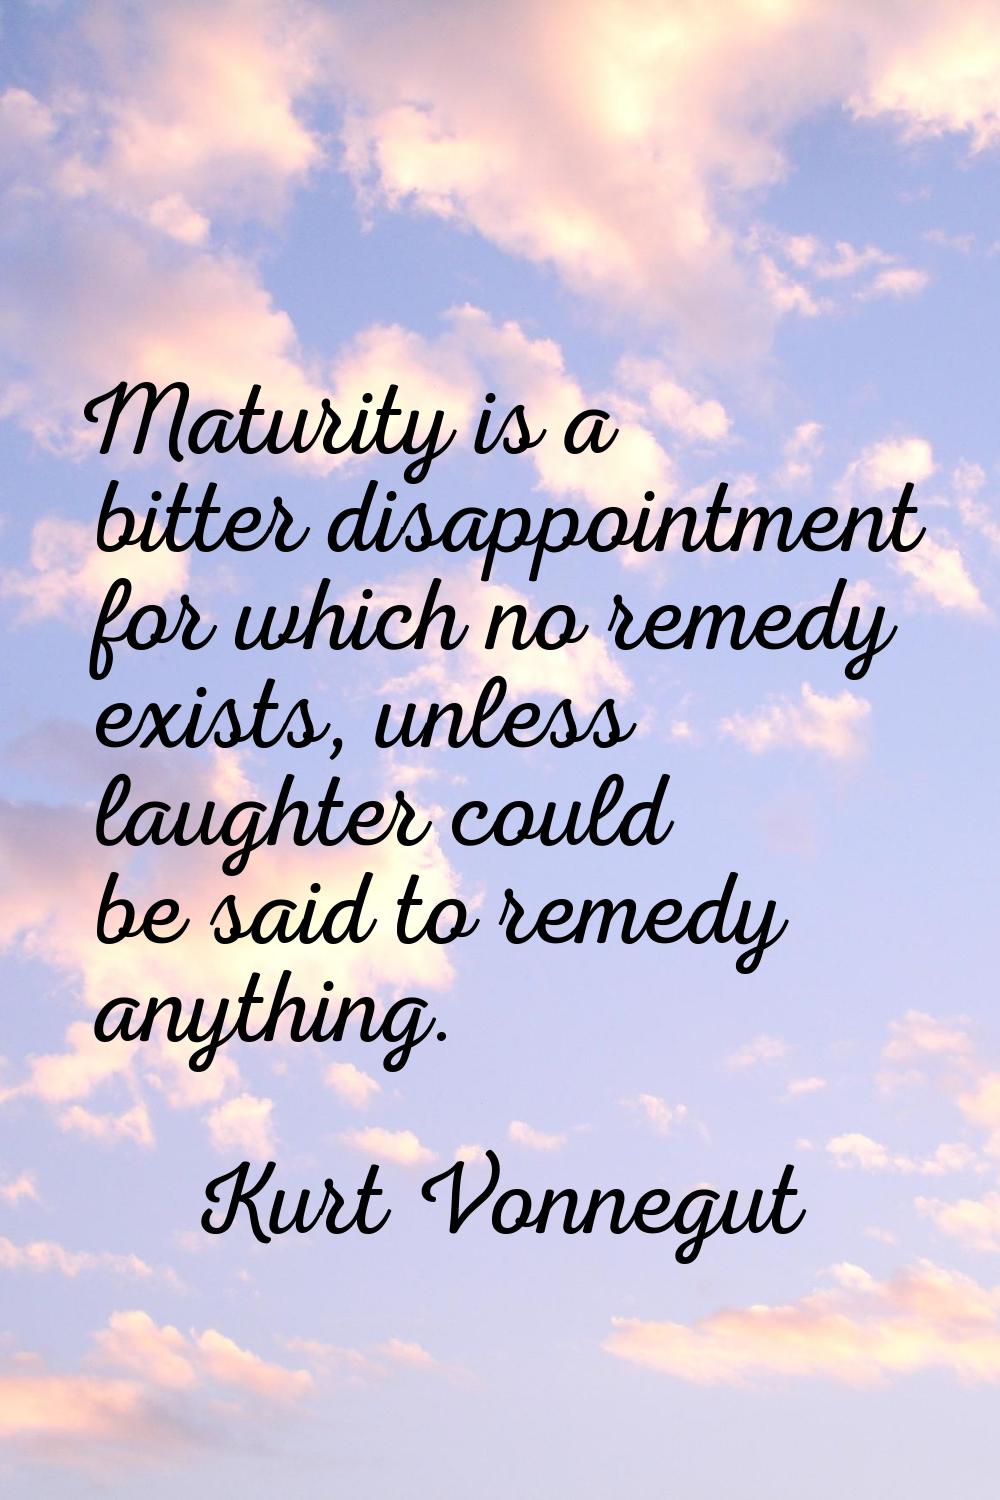 Maturity is a bitter disappointment for which no remedy exists, unless laughter could be said to re